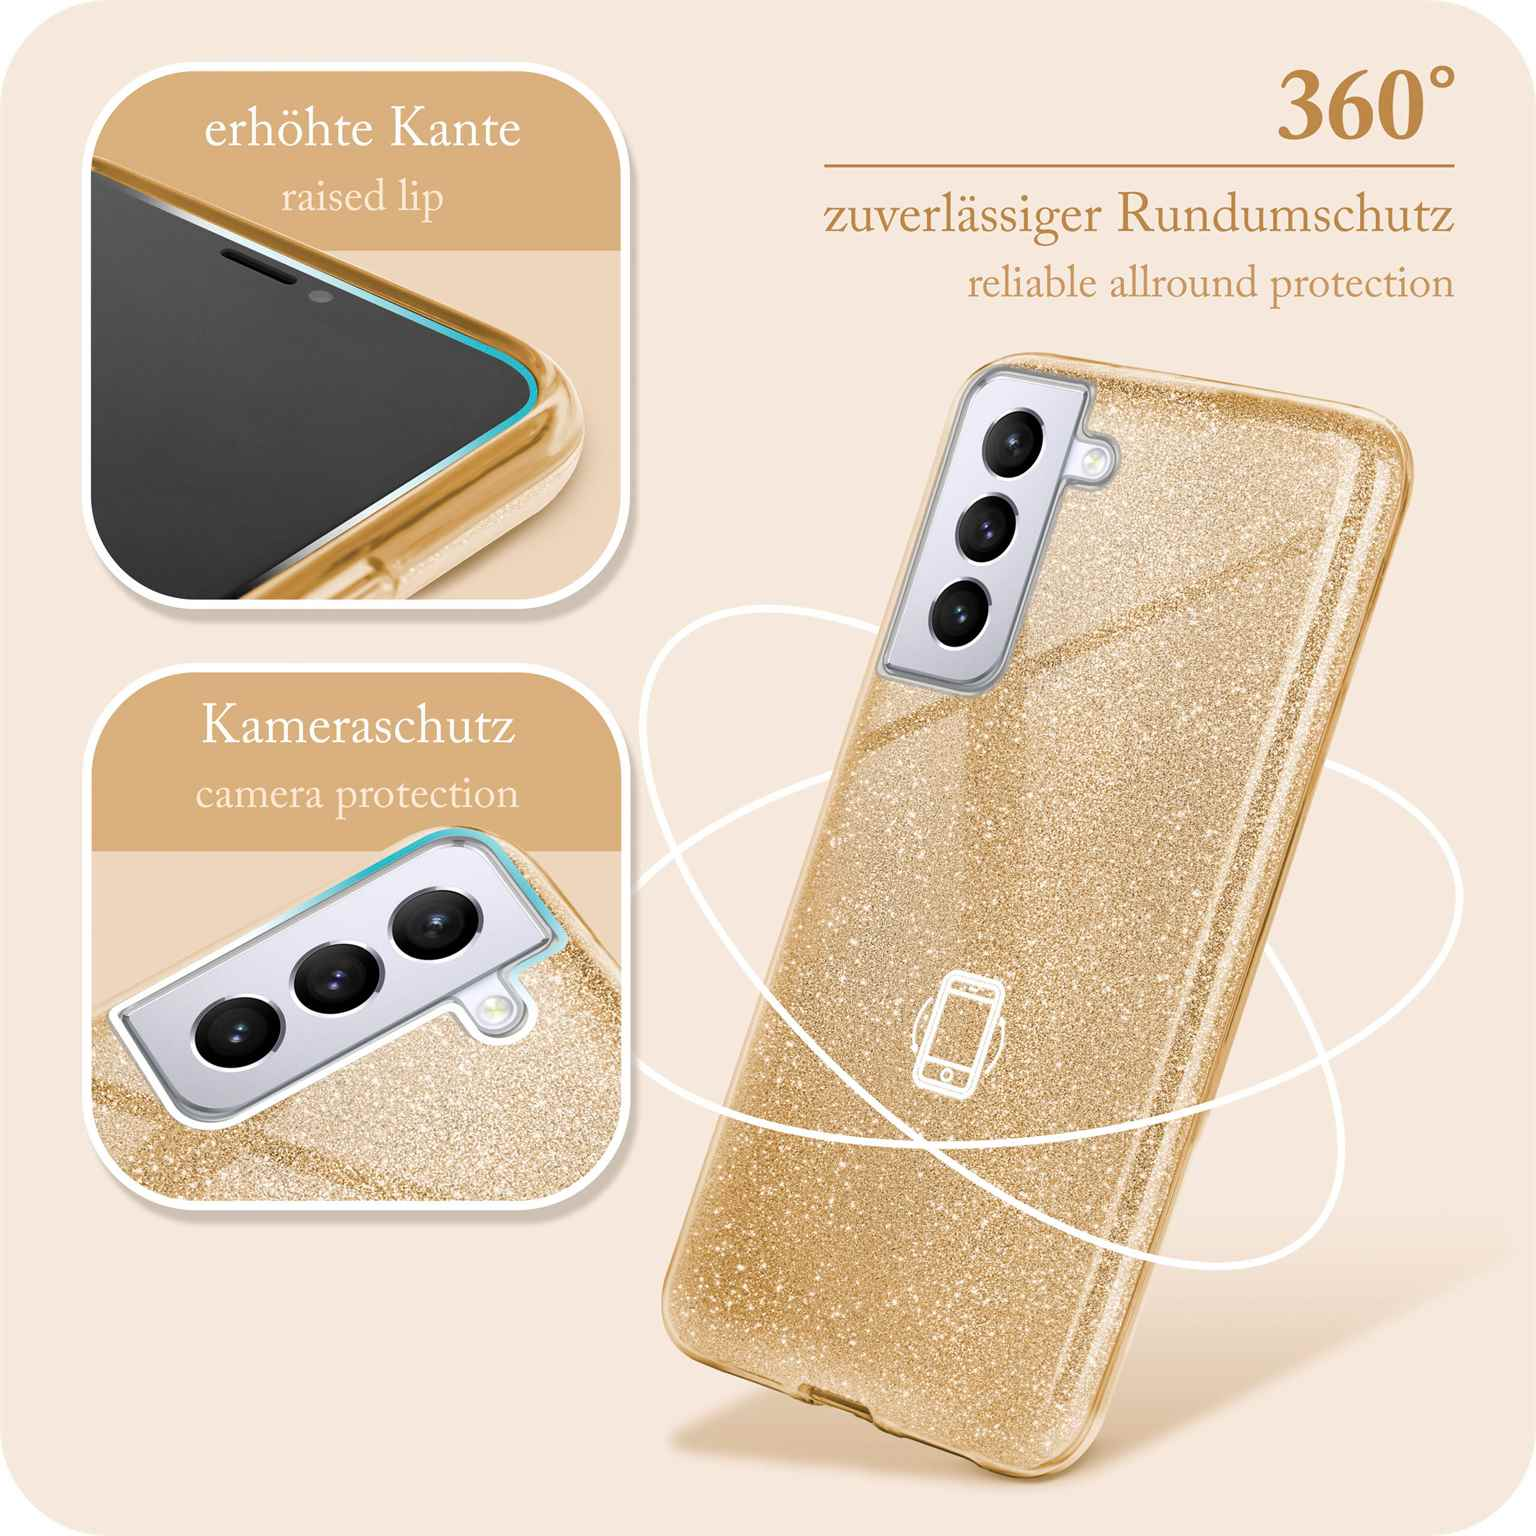 ONEFLOW Glitter Case, Plus, Backcover, Shine - S21 Gold Galaxy Samsung